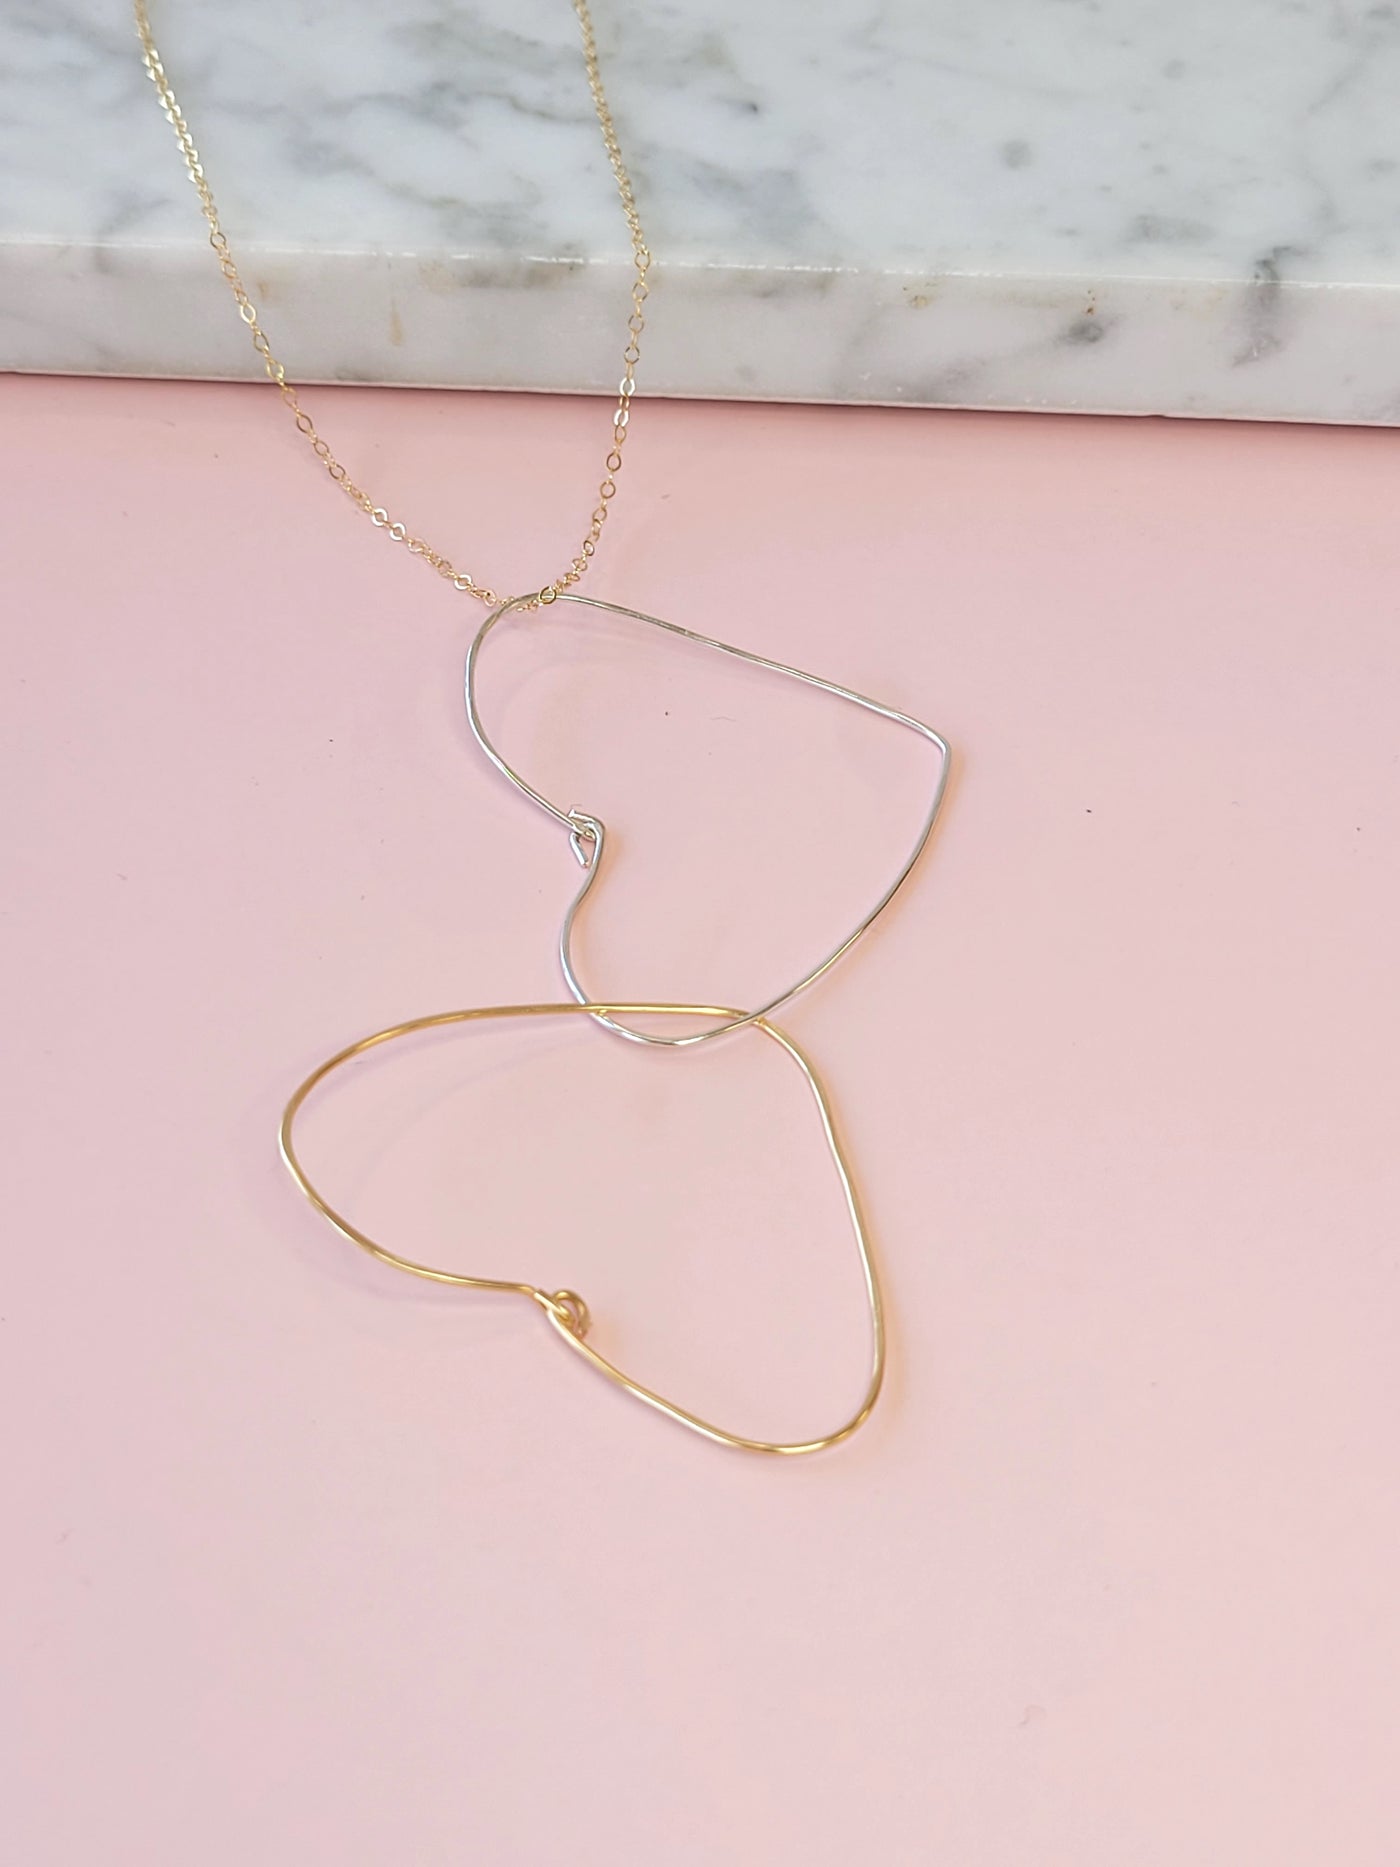 Double Drop Heart Necklace in Gold and Silver